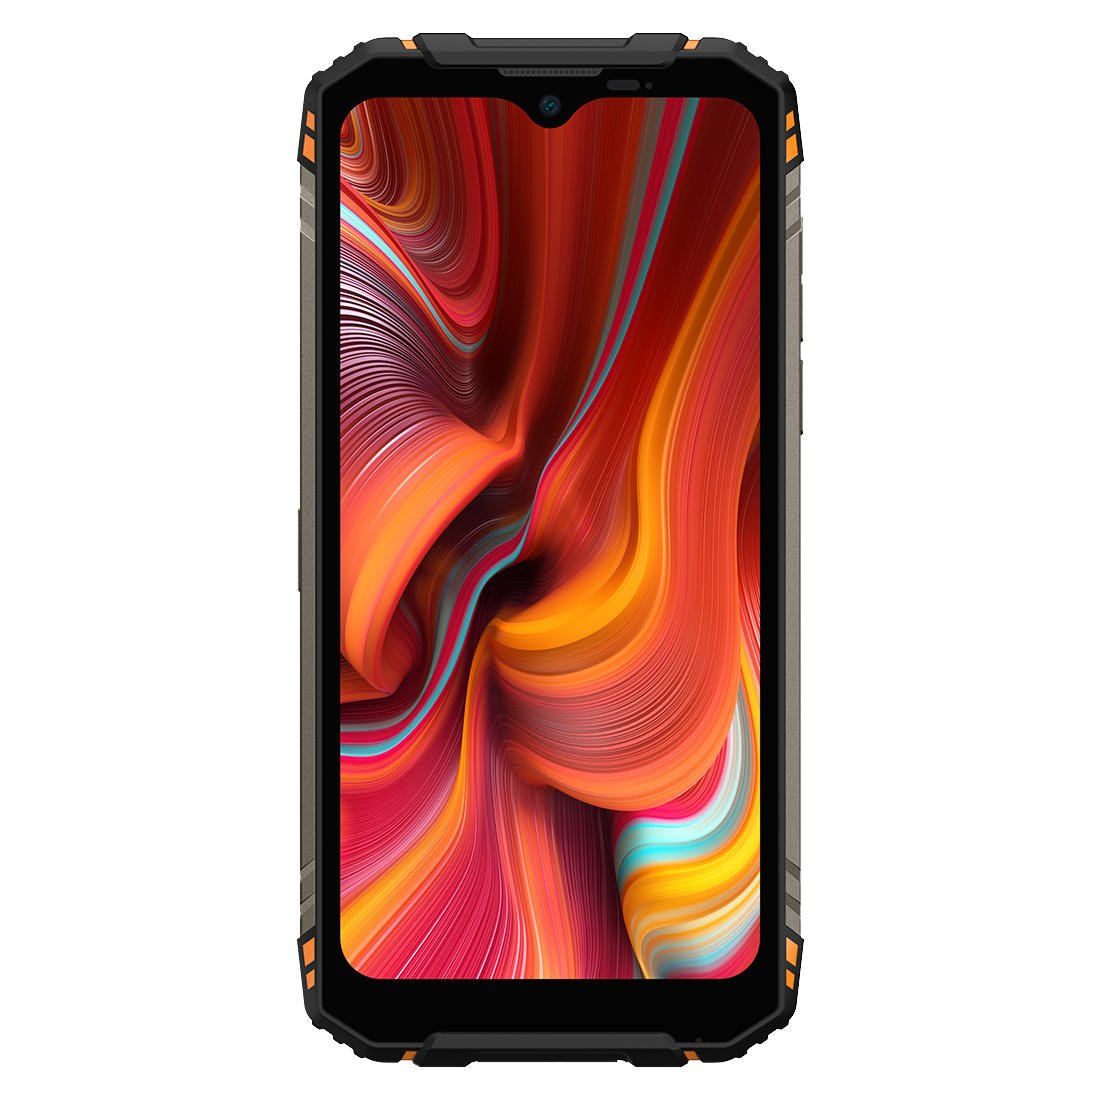 Find DOOGEE S96 Pro Global Bands IP68 IP69K 8GB 128GB Helio G90 NFC Android 10 6350mAh 6.22 inch 48MP Round Quad Camera 20MP Infrared Night Vision 4G Smartphone for Sale on Gipsybee.com with cryptocurrencies